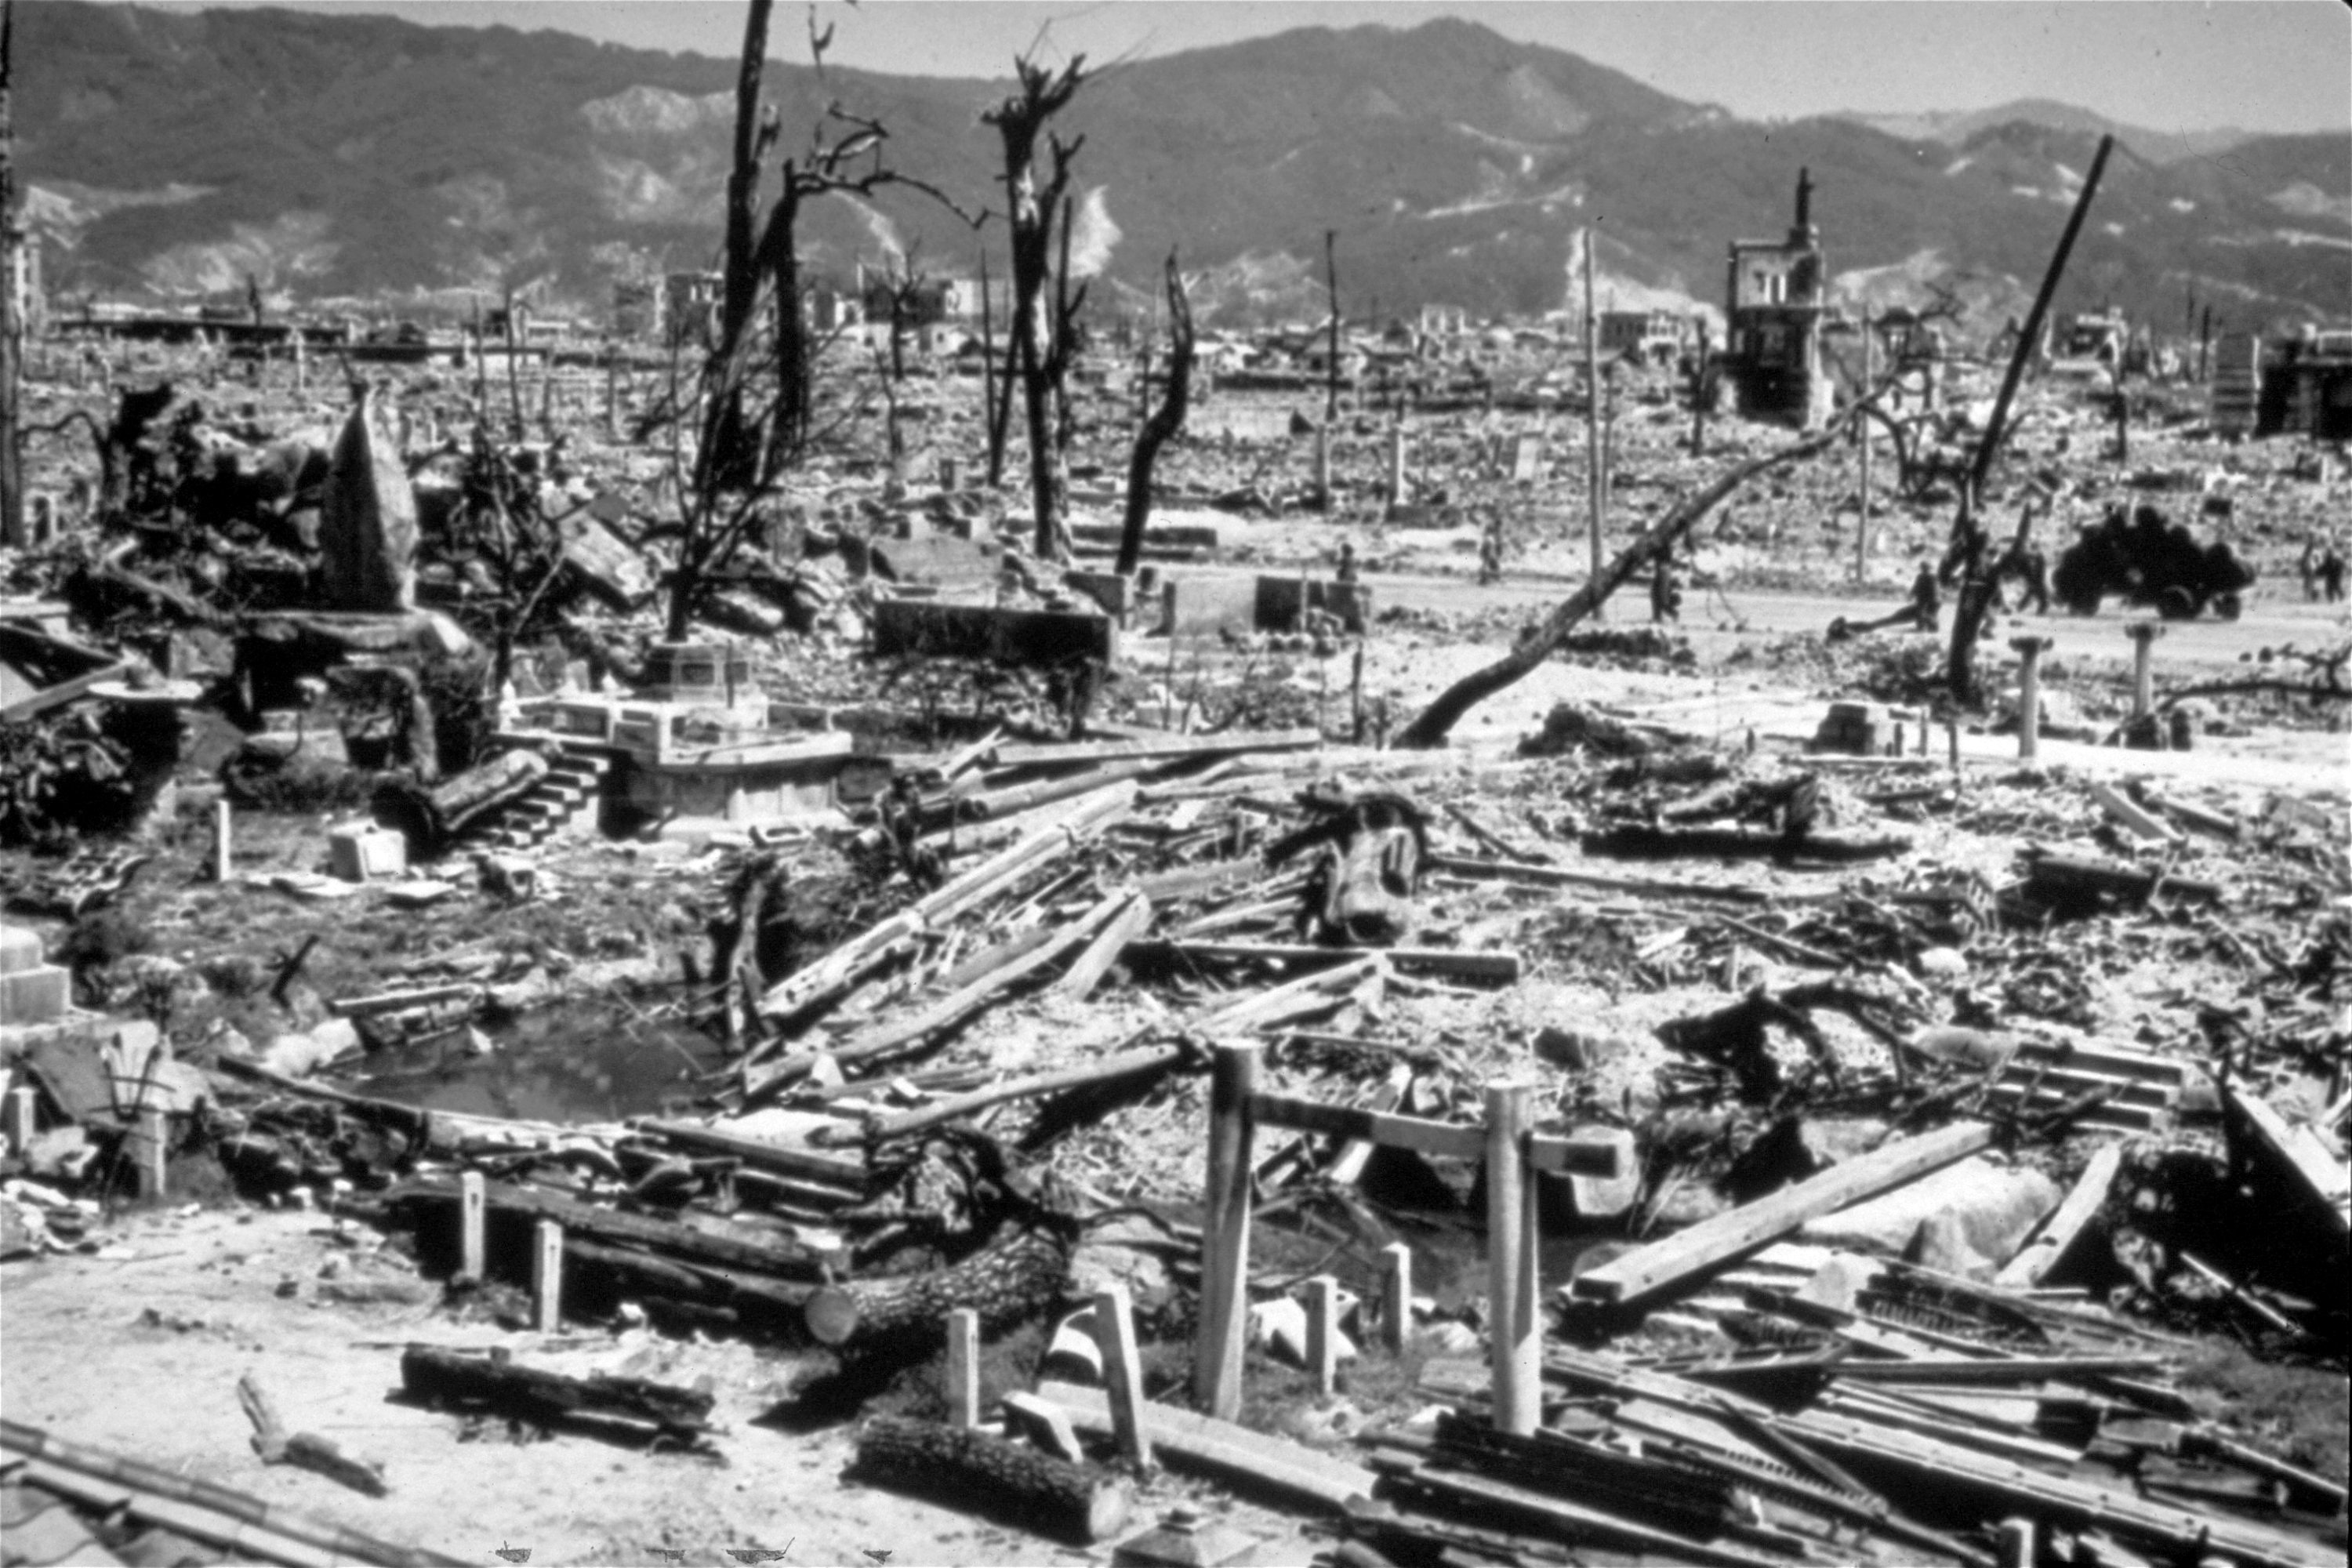 The destruction from the explosion of an atomic bomb in Hiroshima, Japan, Aug. 6, 1945. (AP Photo)